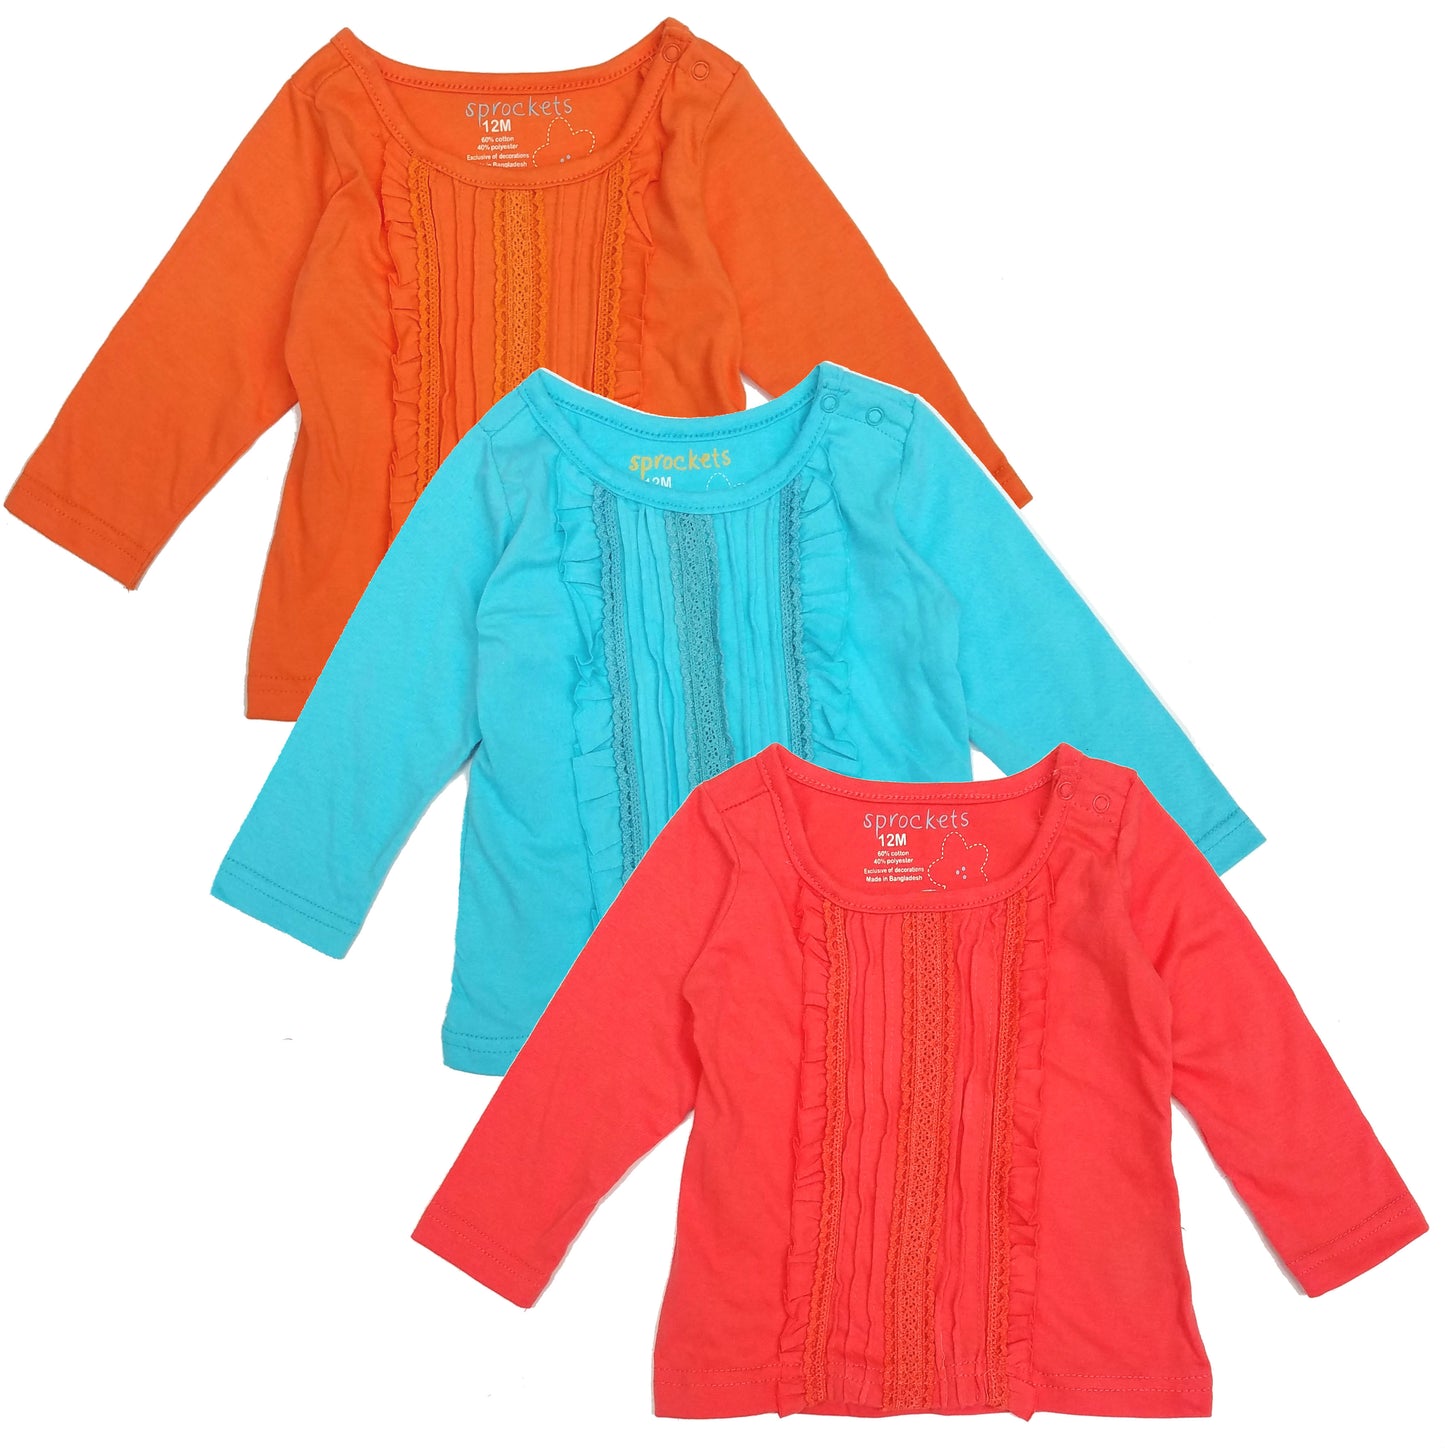 Girls Top Long Sleeve Assorted Color